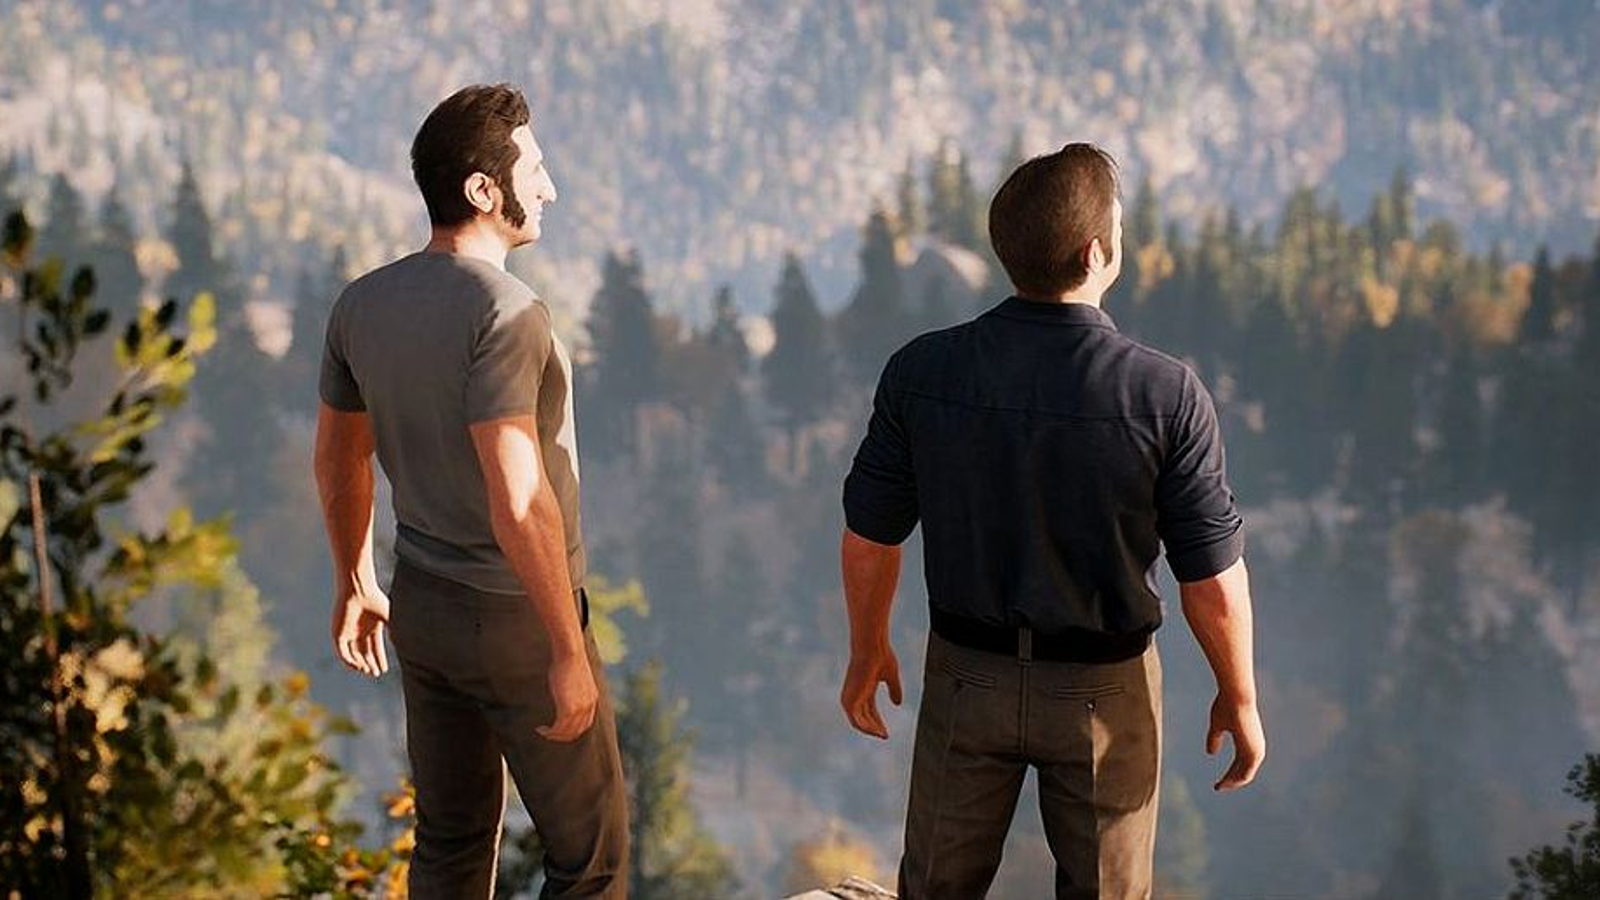 A way out game. A way out Винсент. Way out игра. А Wаy оut игра. A way out (2018).